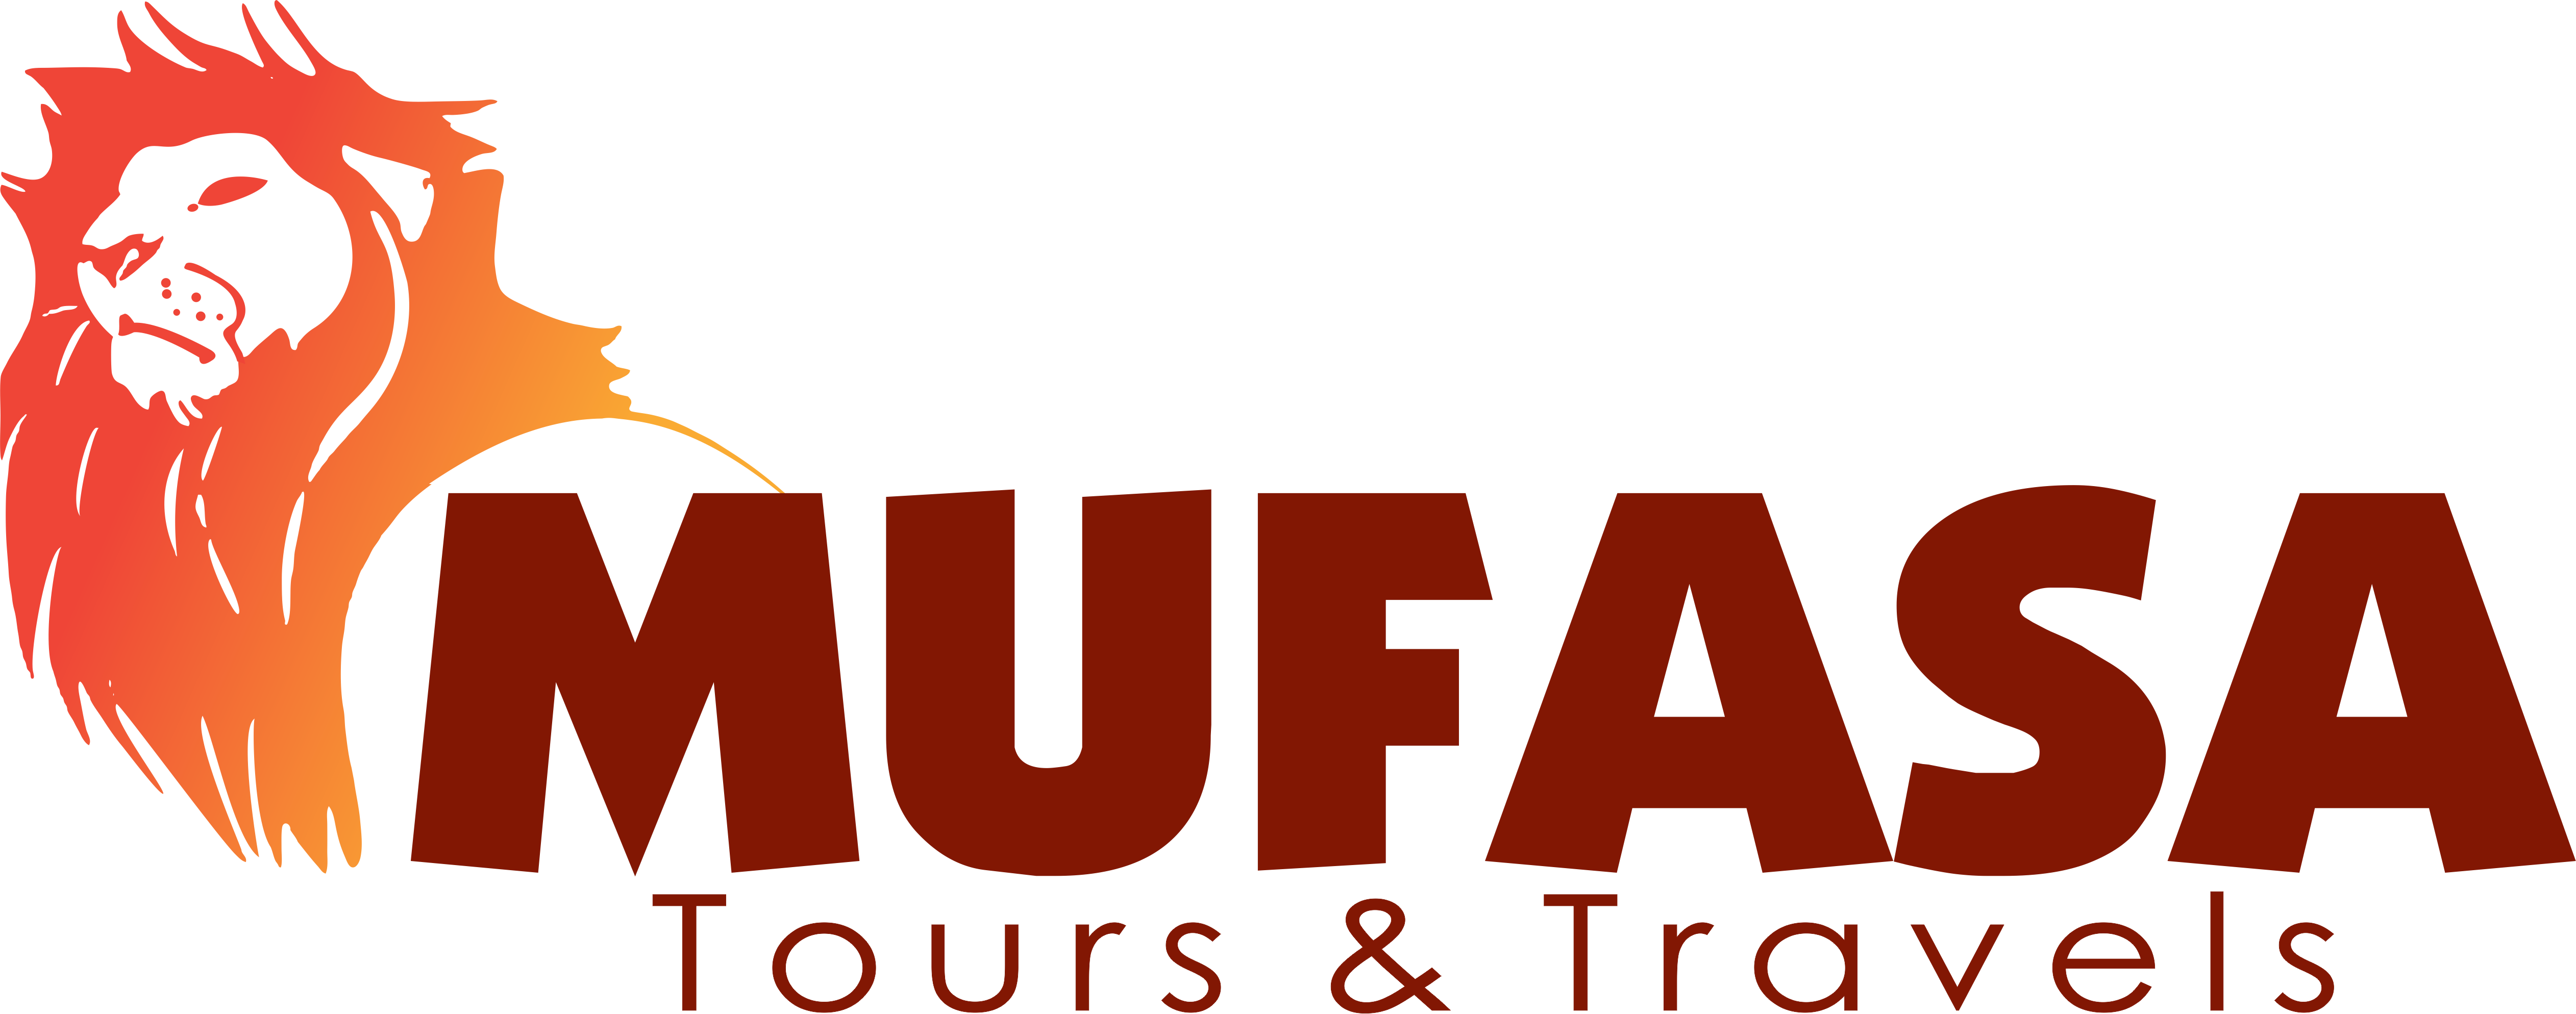 Mufasa Tours and Travels | Day Tours & Excursions - Mufasa Tours and Travels